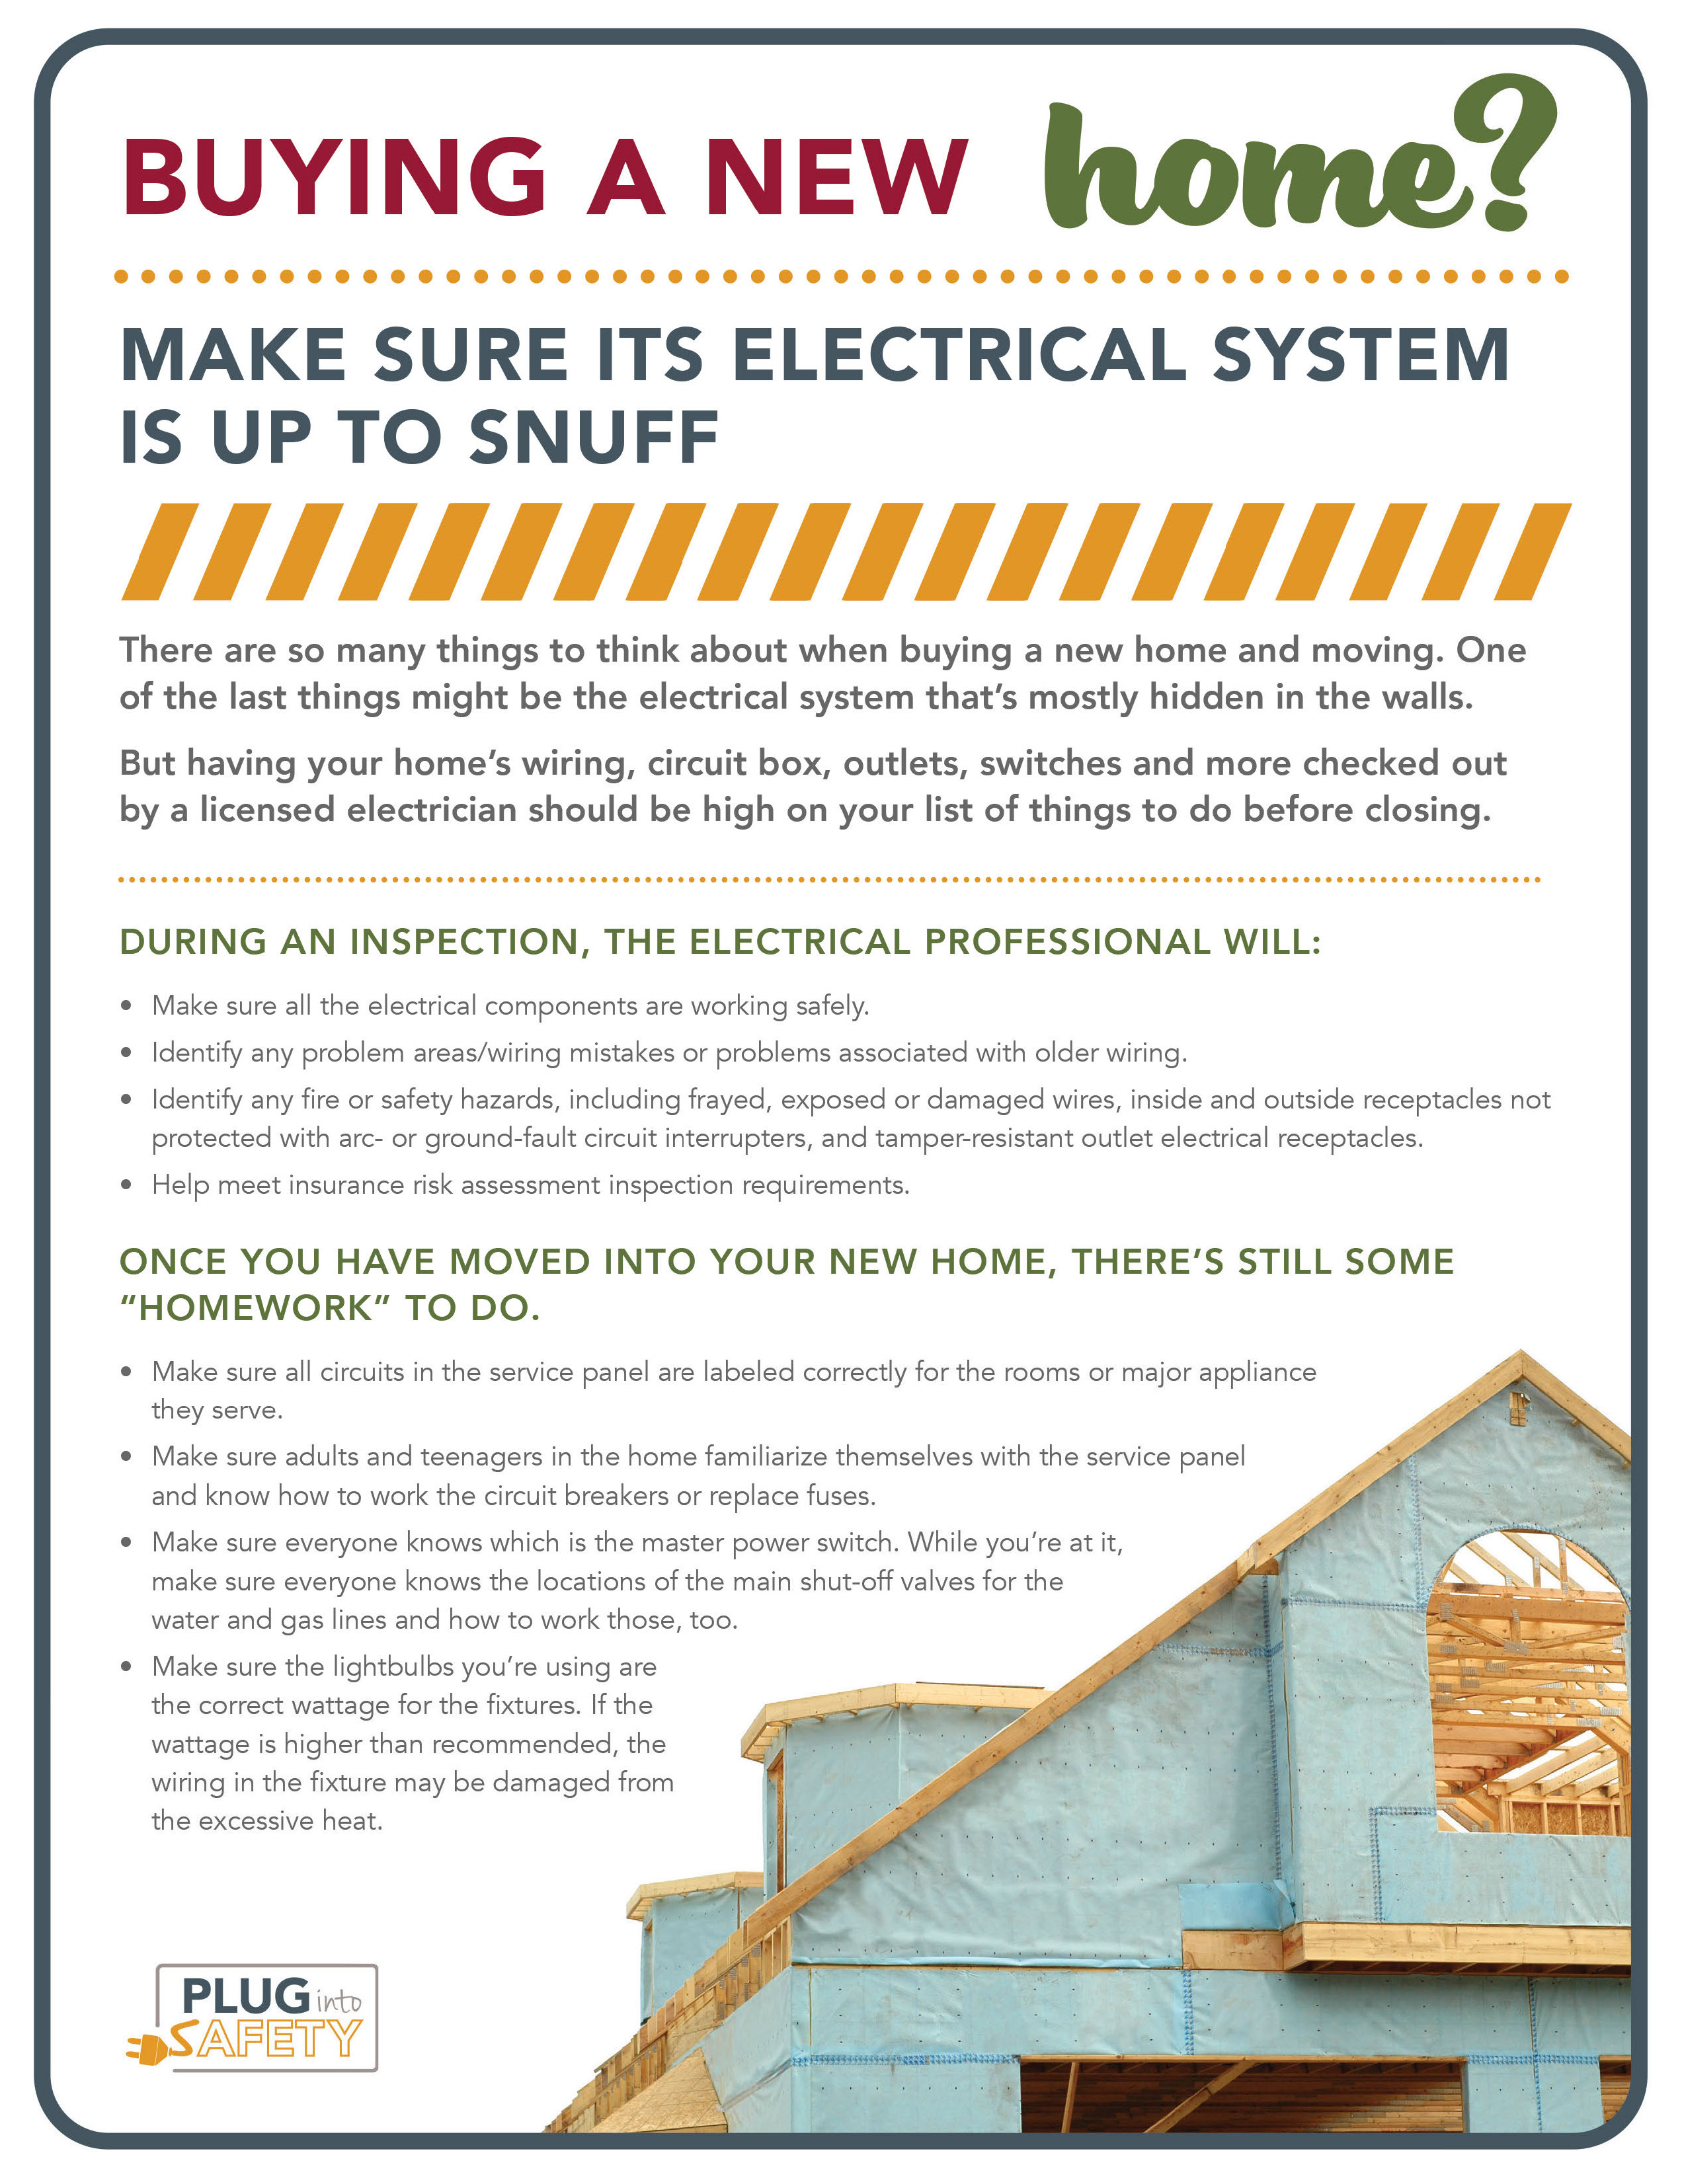 Infographic on electrical safety when buying a new home